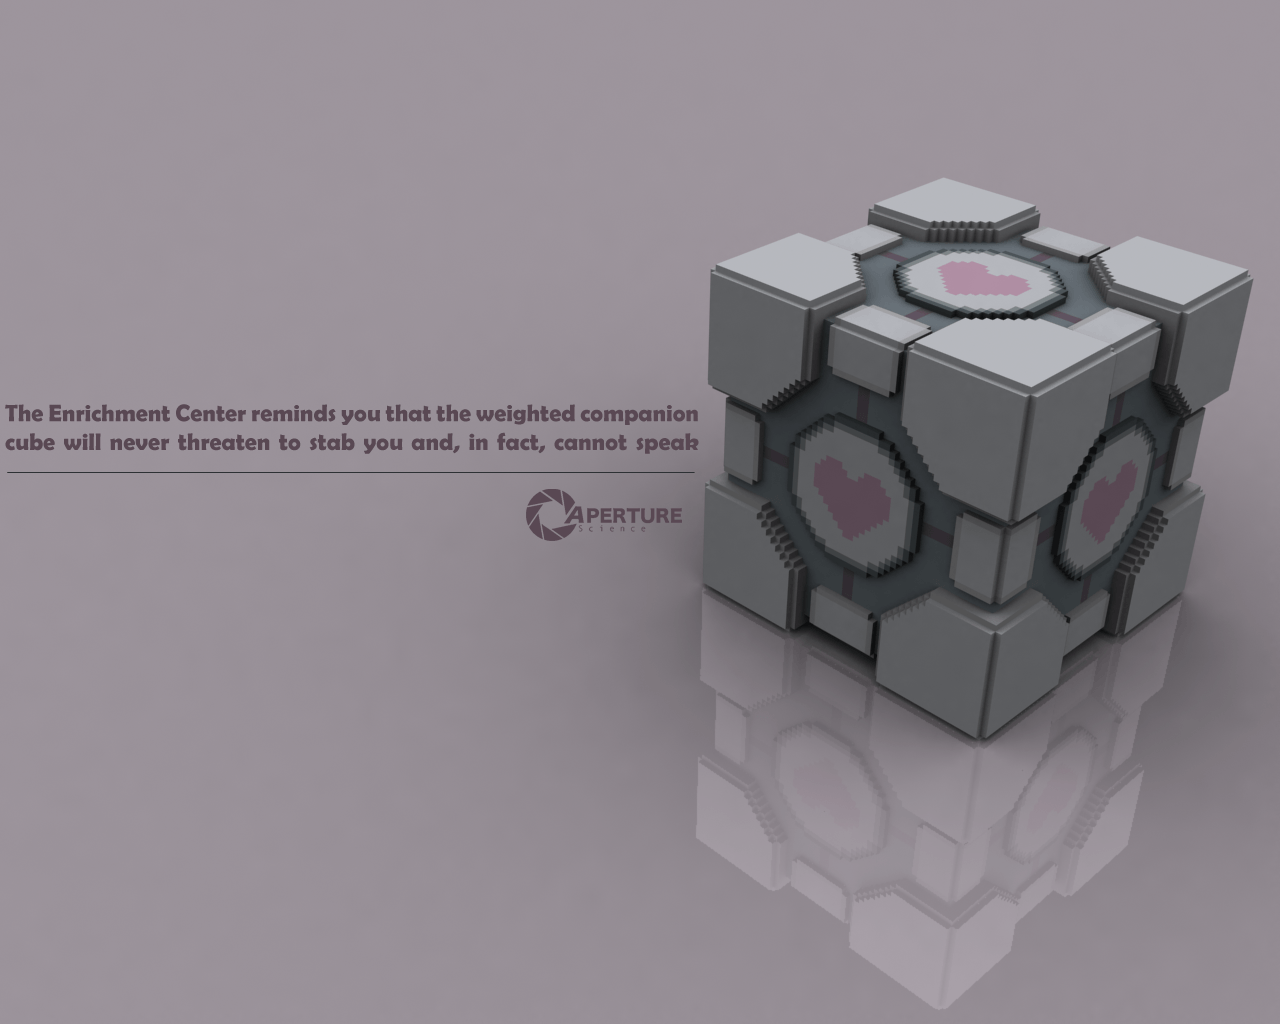 Can you save the companion cube